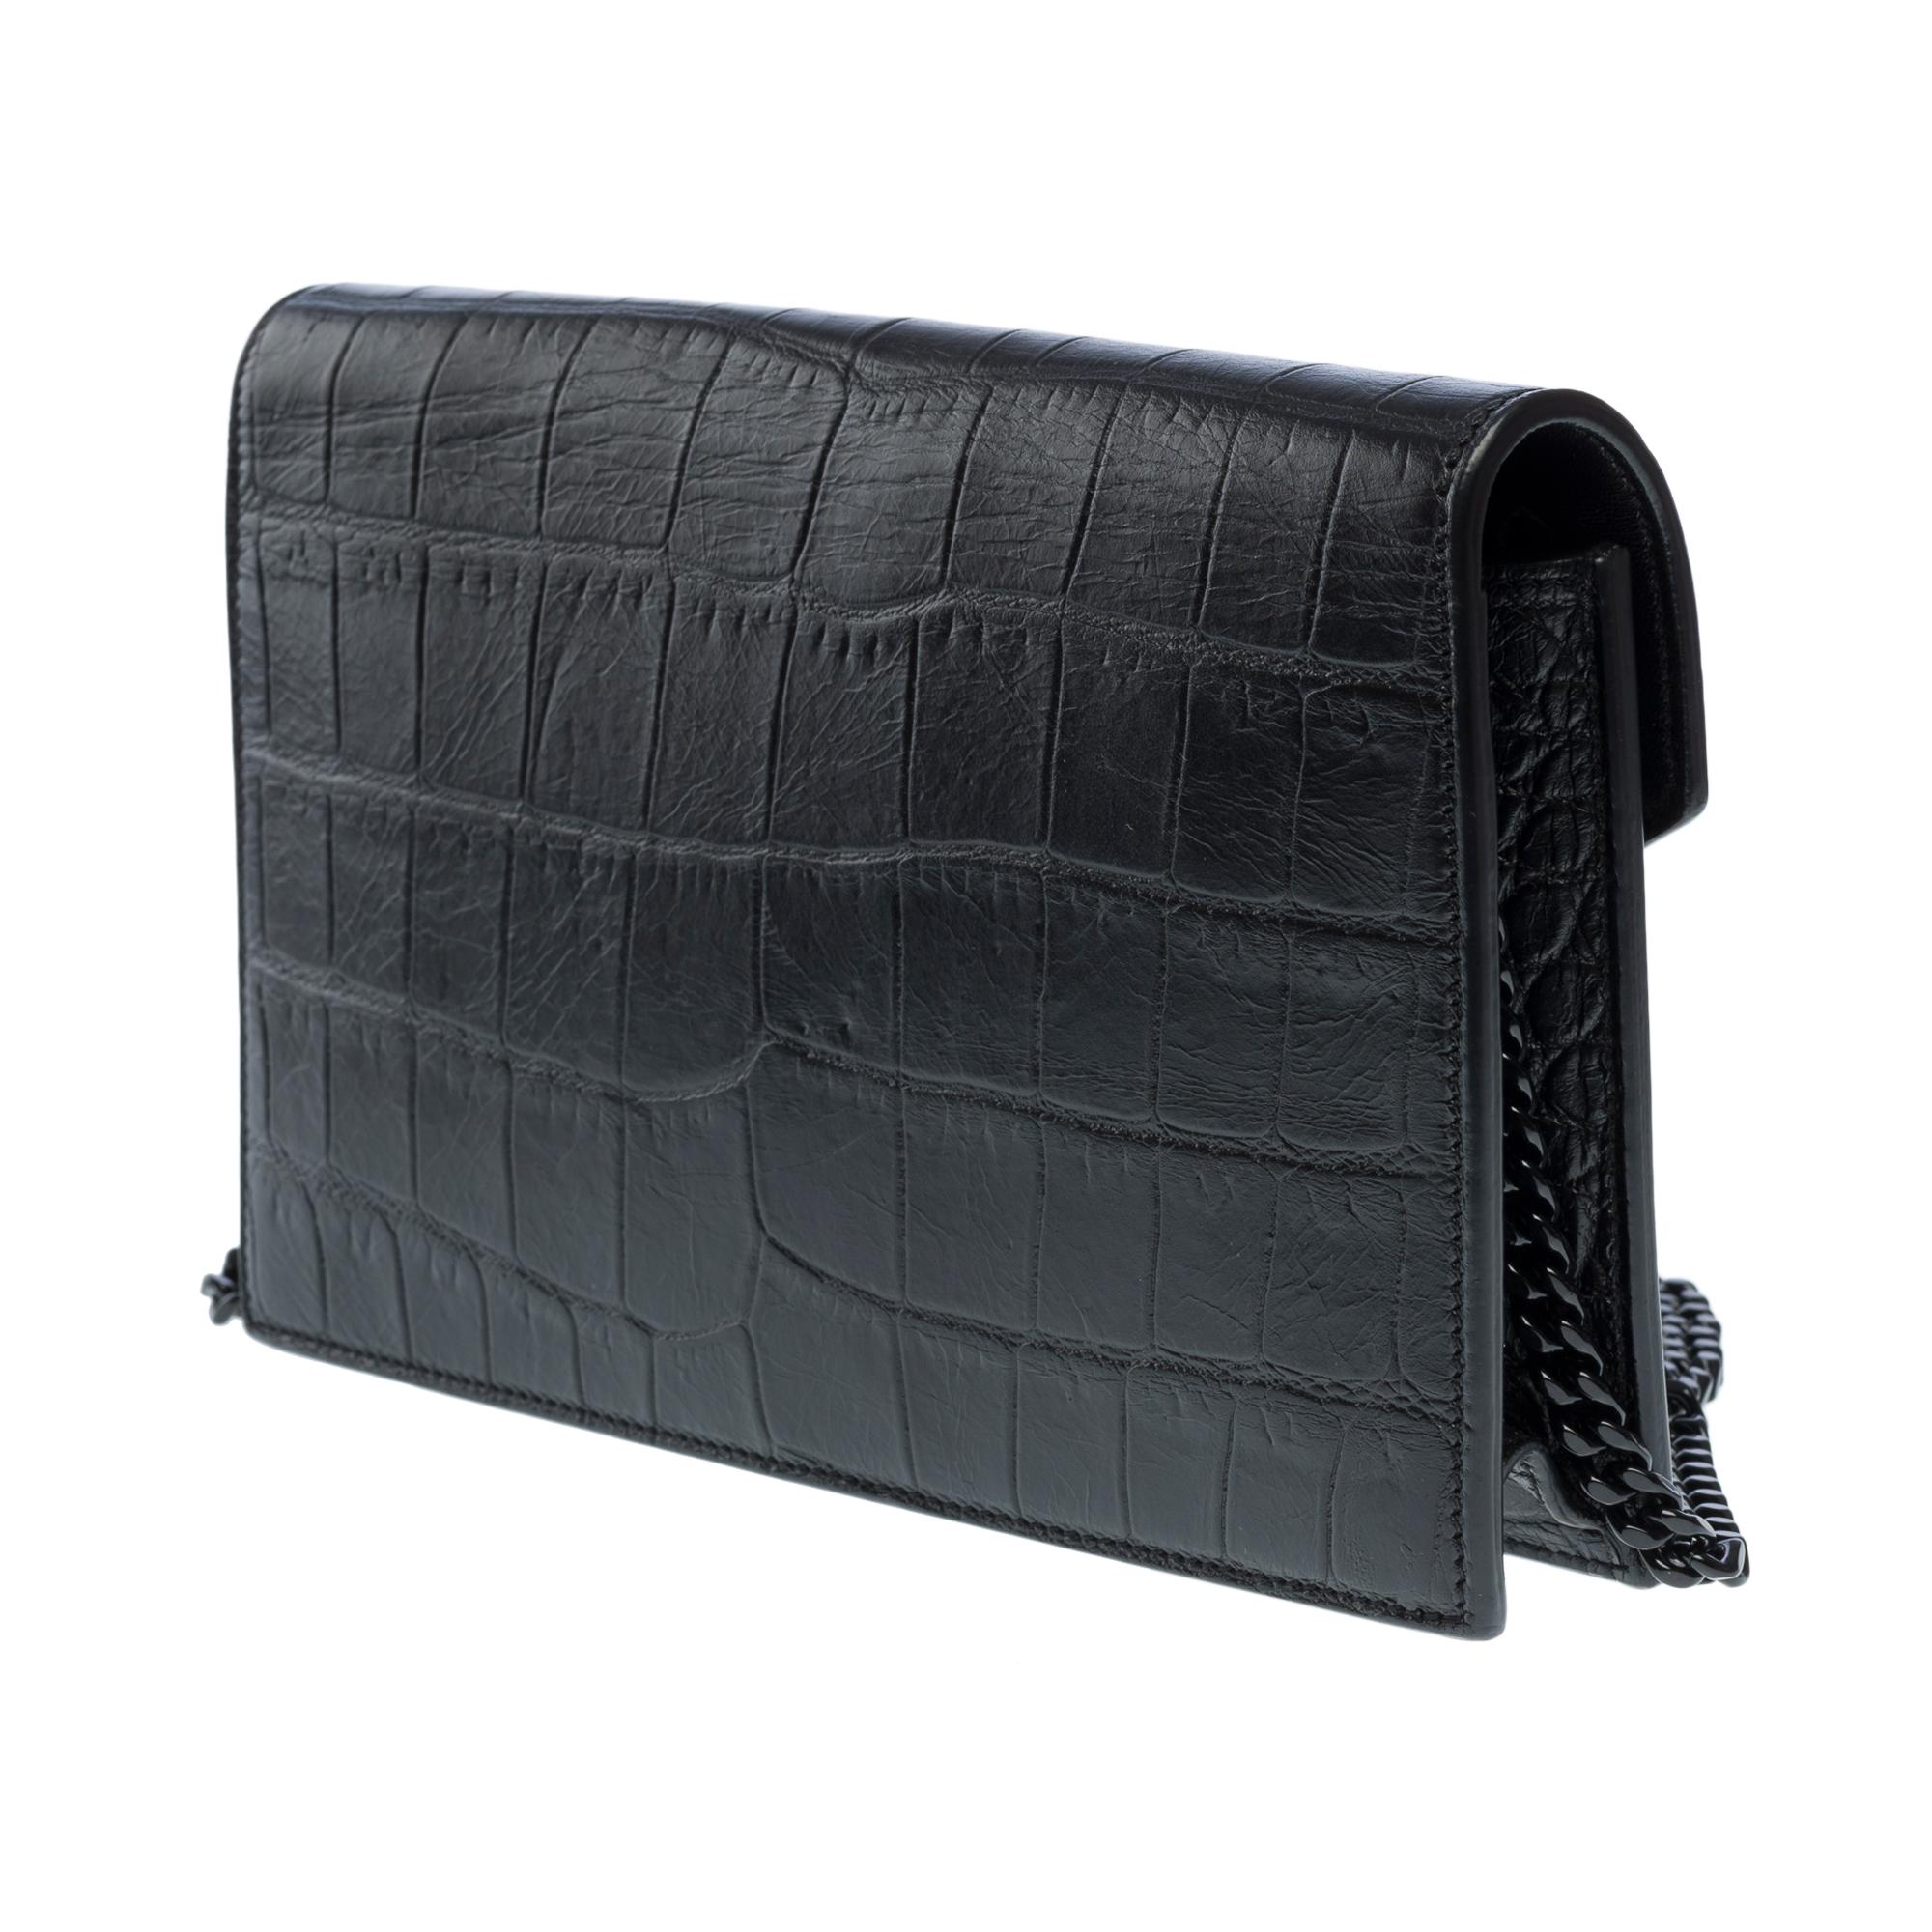 New YSL Wallet Enveloppe in black leather printed crocodile , BHW For Sale 2